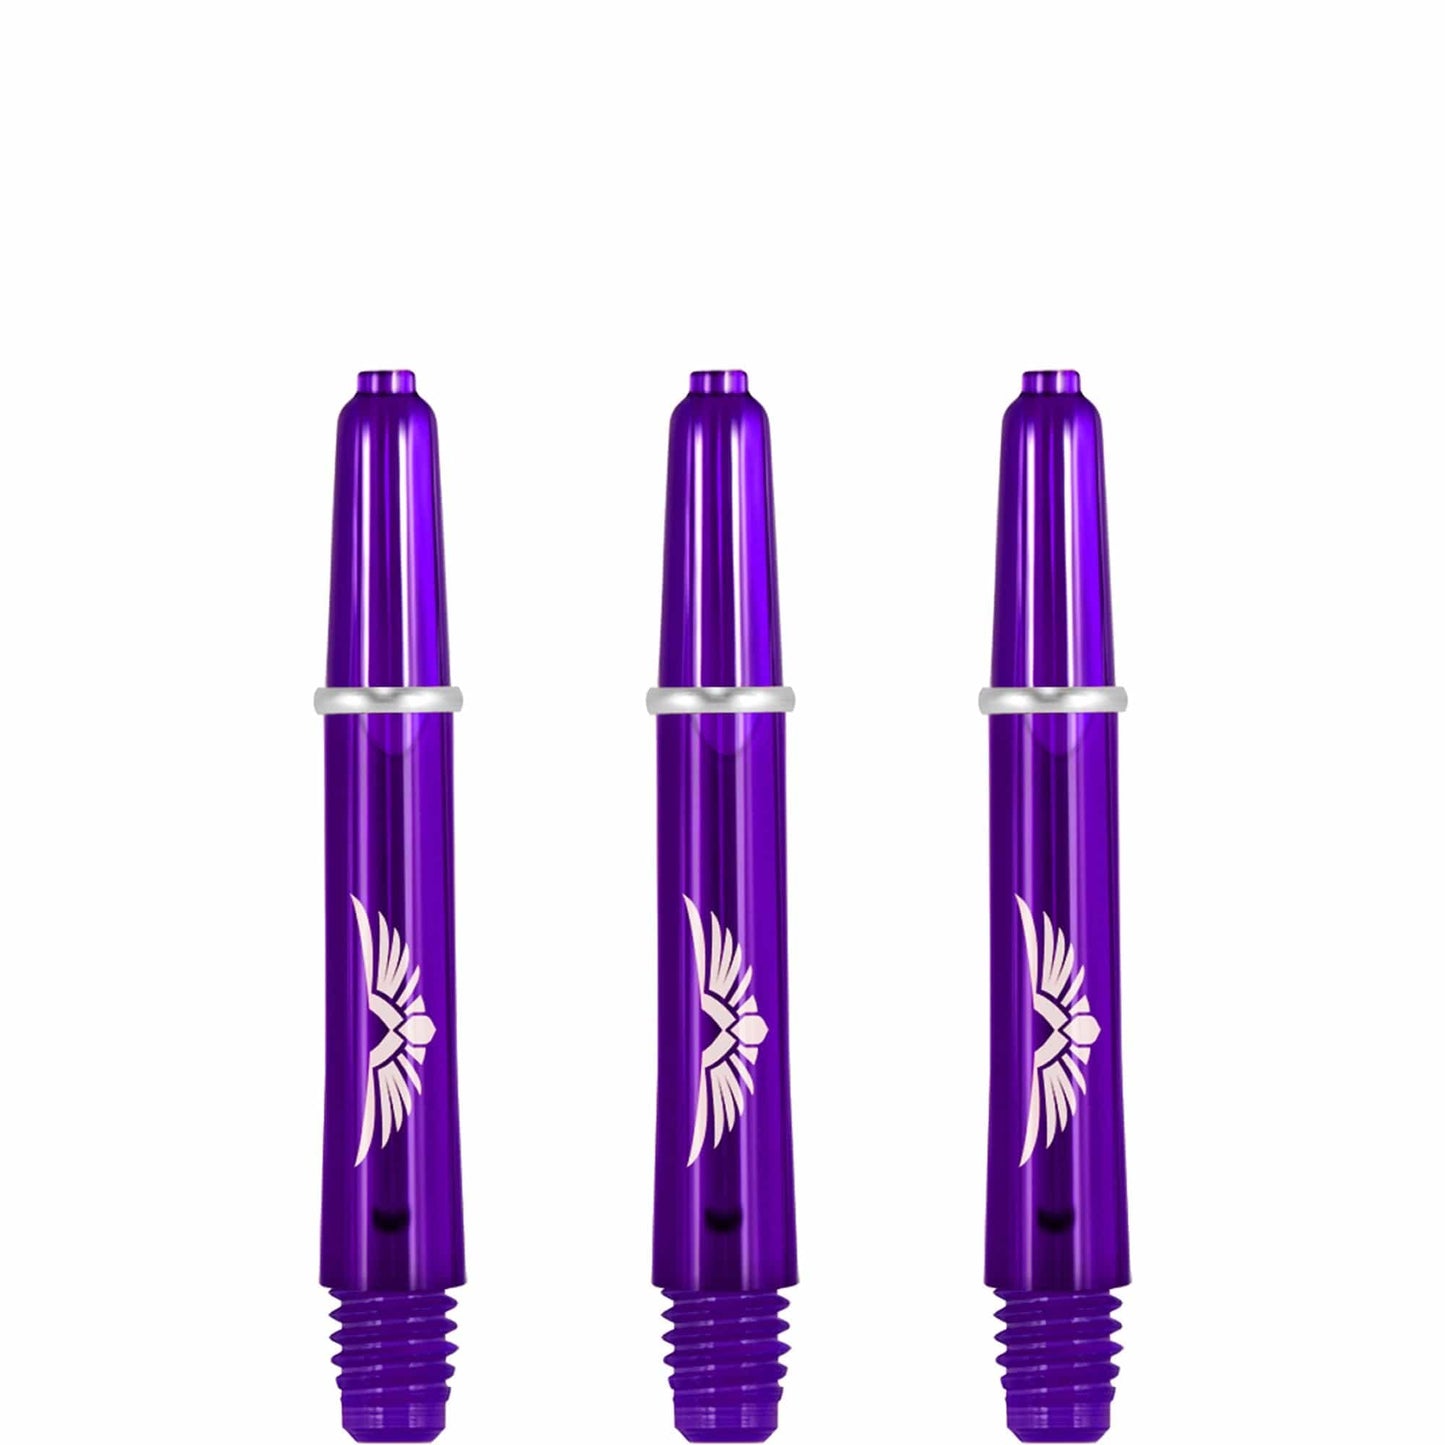 Shot Eagle Claw Dart Shafts - with Machined Rings - Strong Polycarbonate Stems - Purple Short